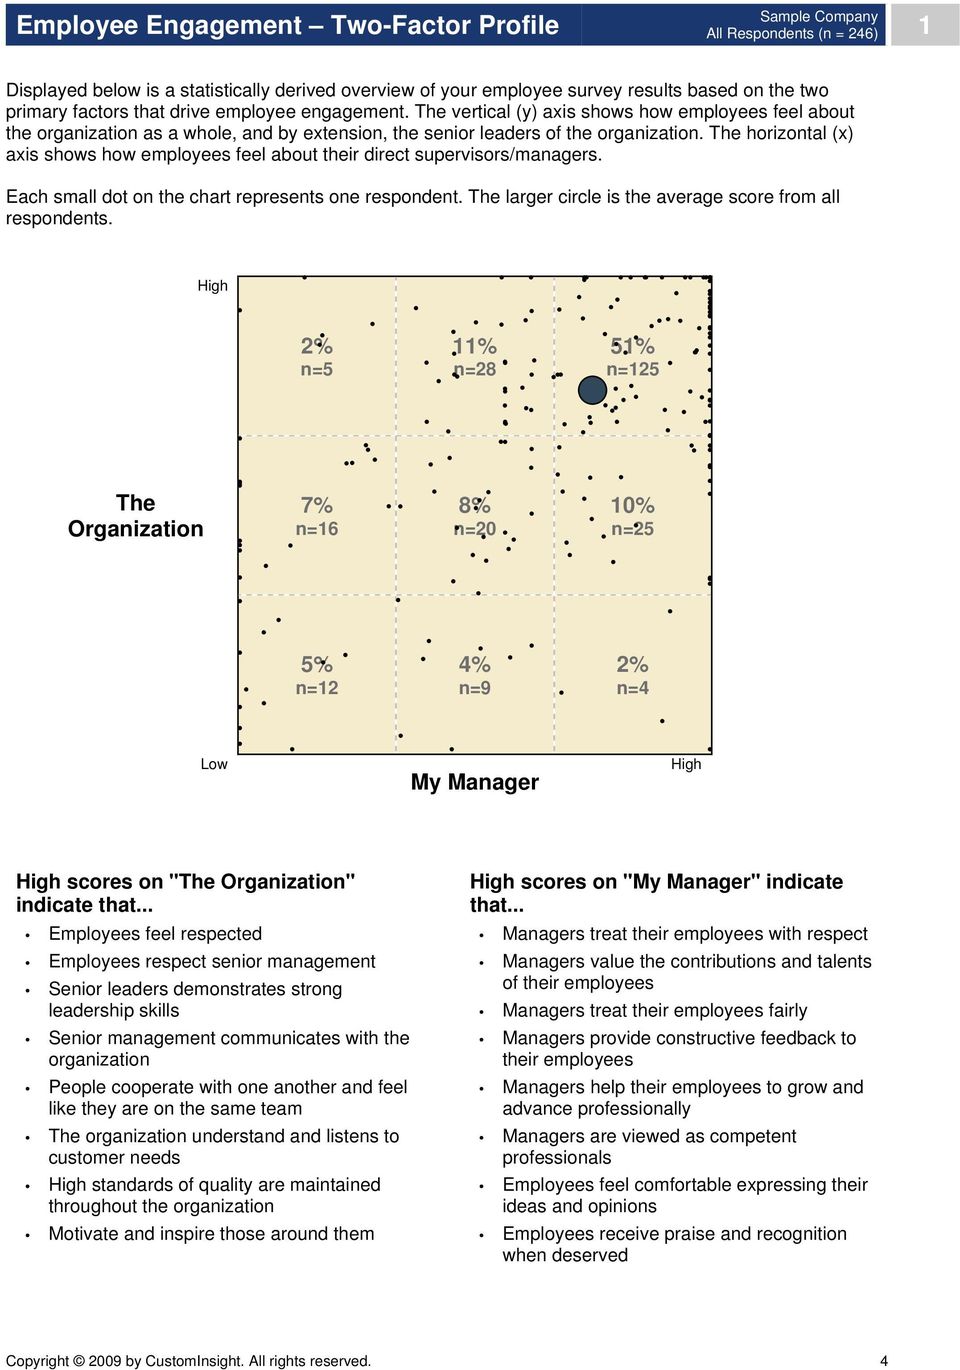 The horizontal (x) axis shows how employees feel about their direct supervisors/managers. Each small dot on the chart represents one respondent.